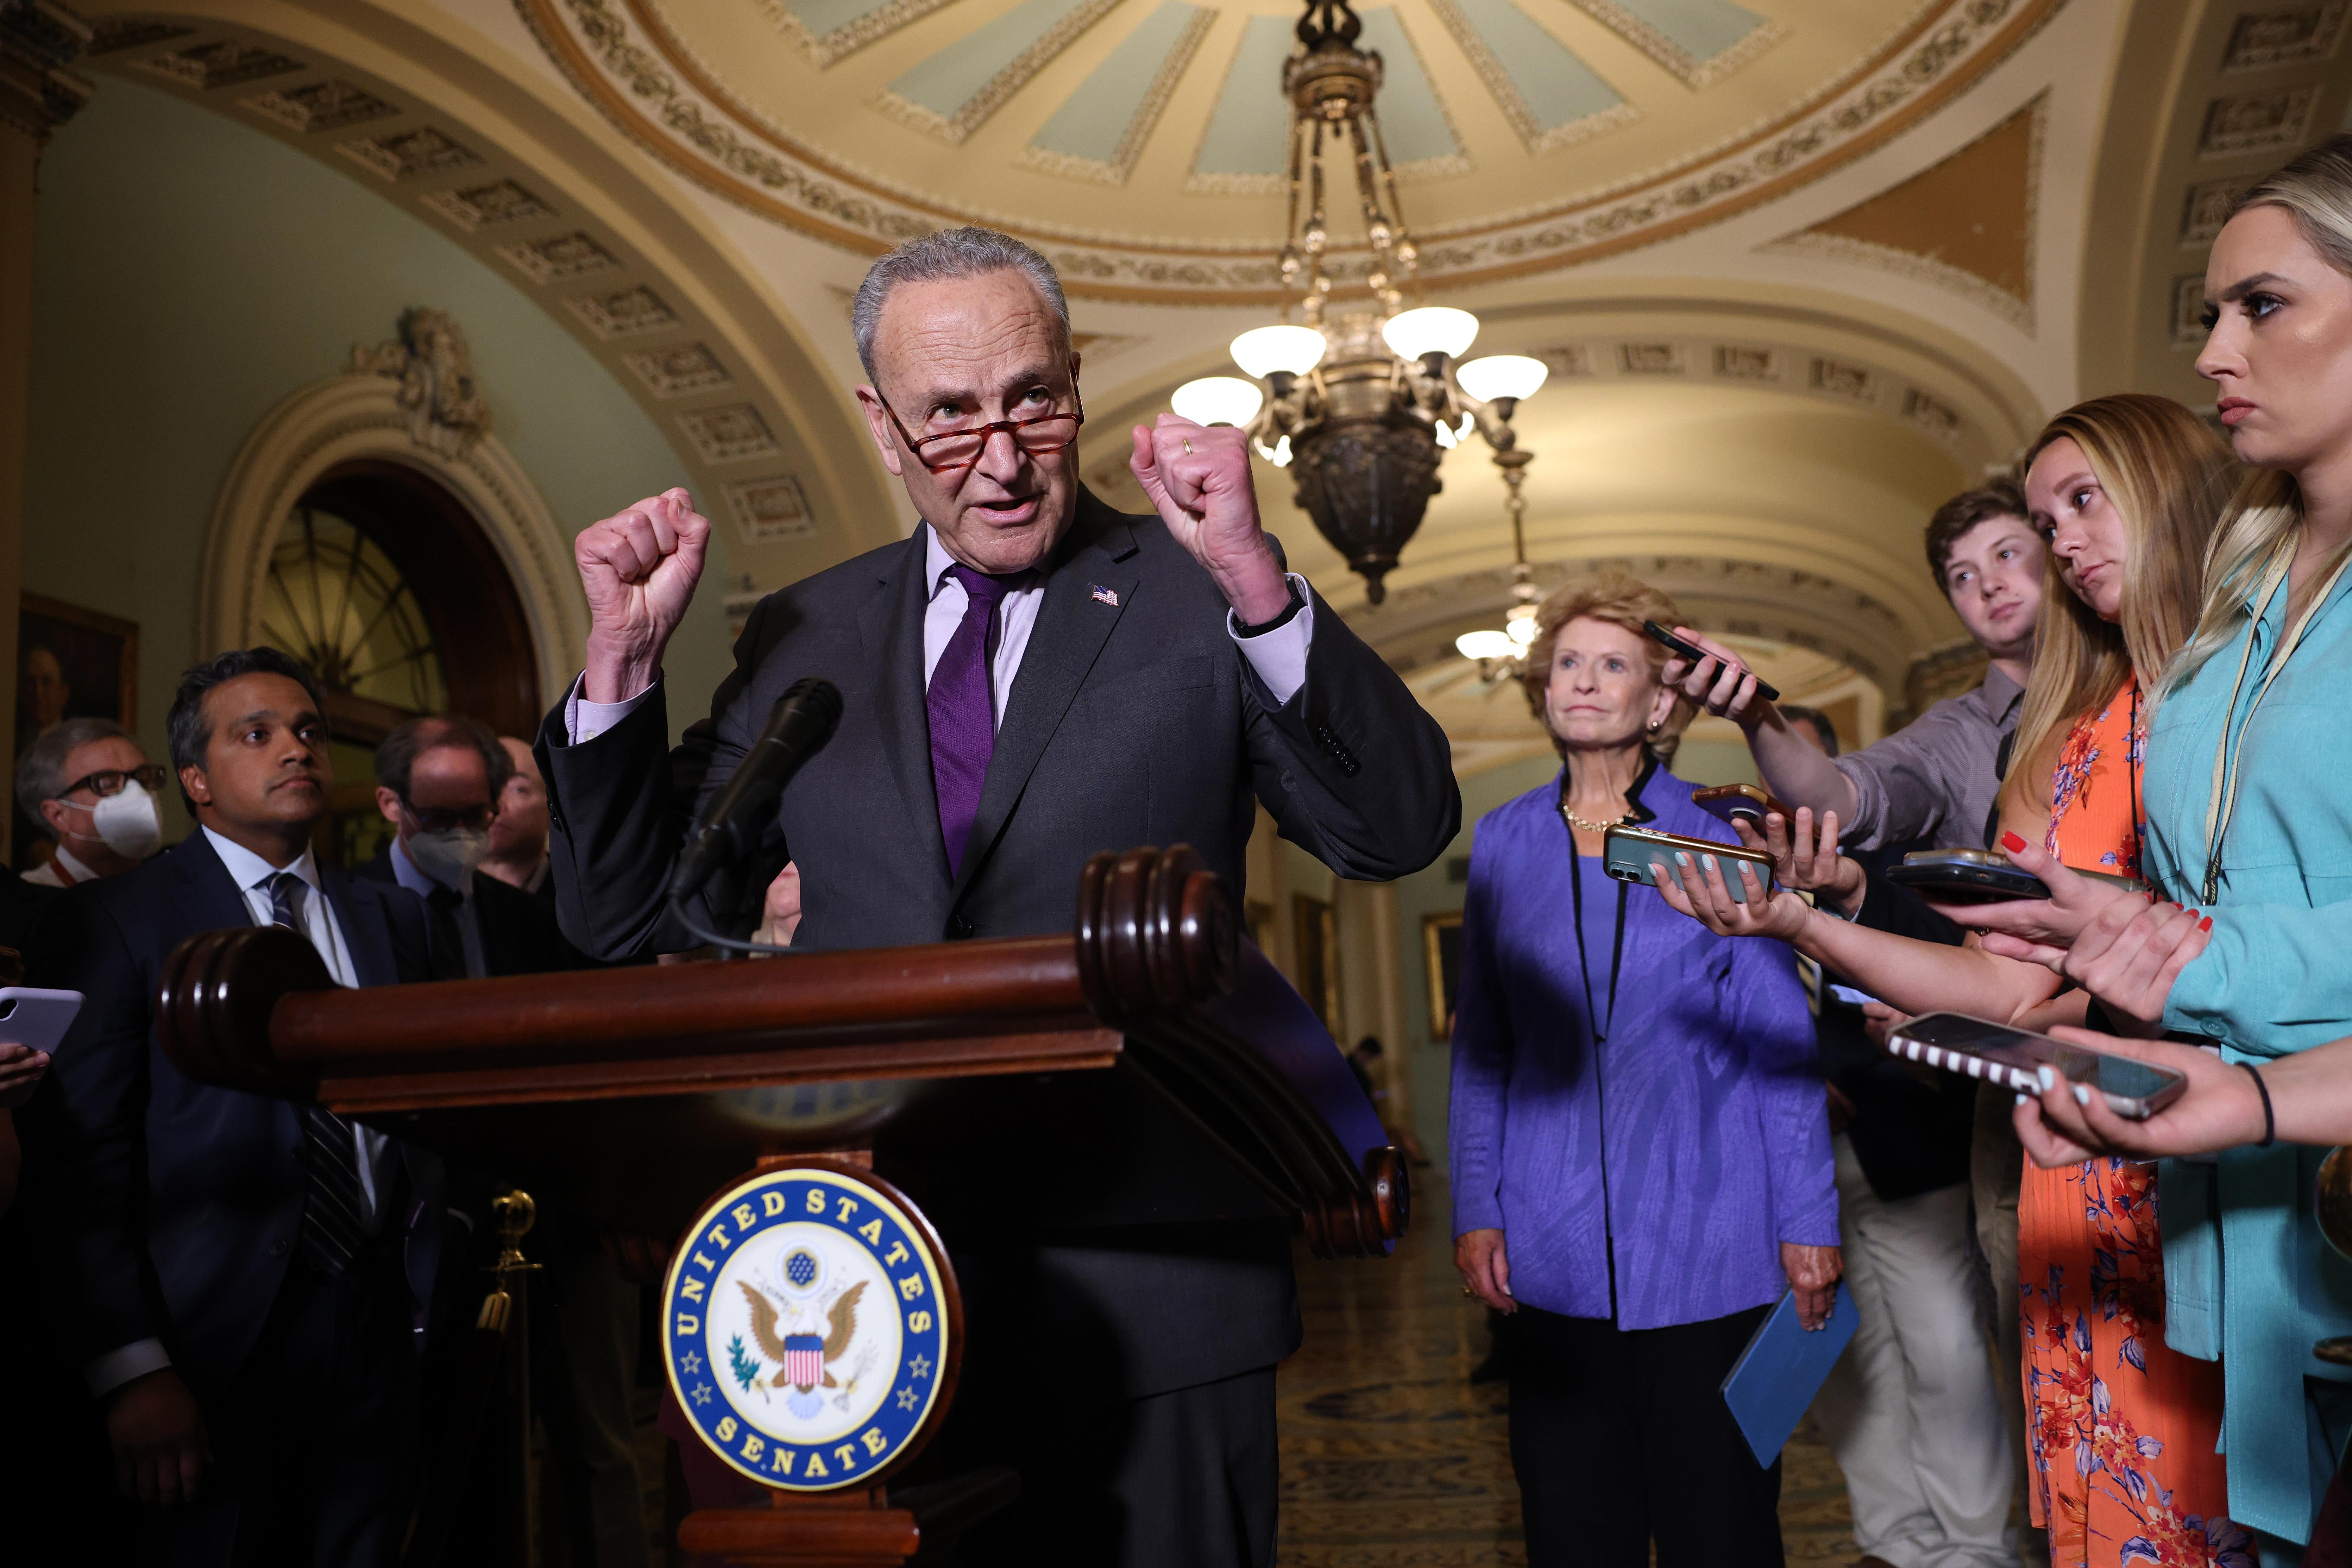 Chuck Schumer makes two fists as he speaks at a podium surrounded by reporters